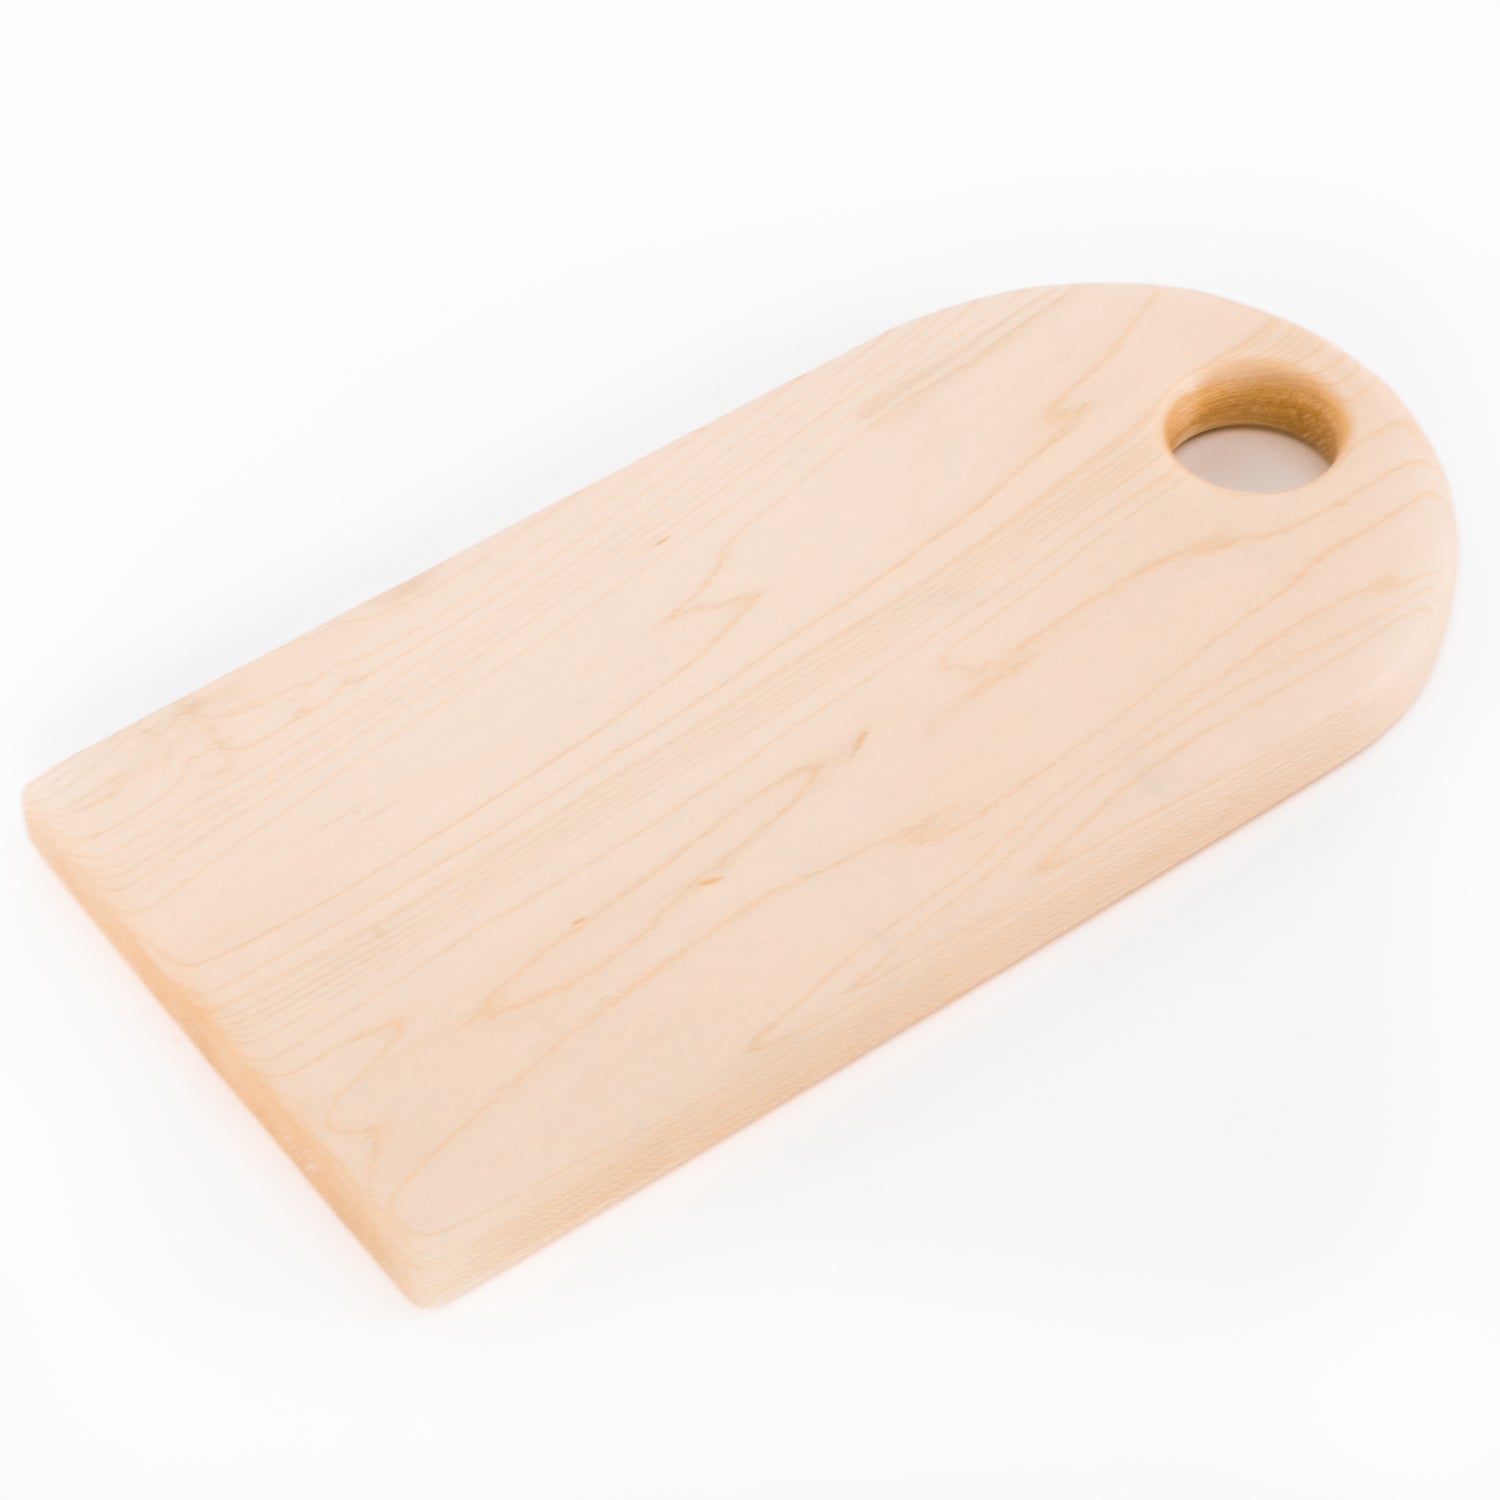 Rustic Designs by Rich - 11"  Maple Serving Board